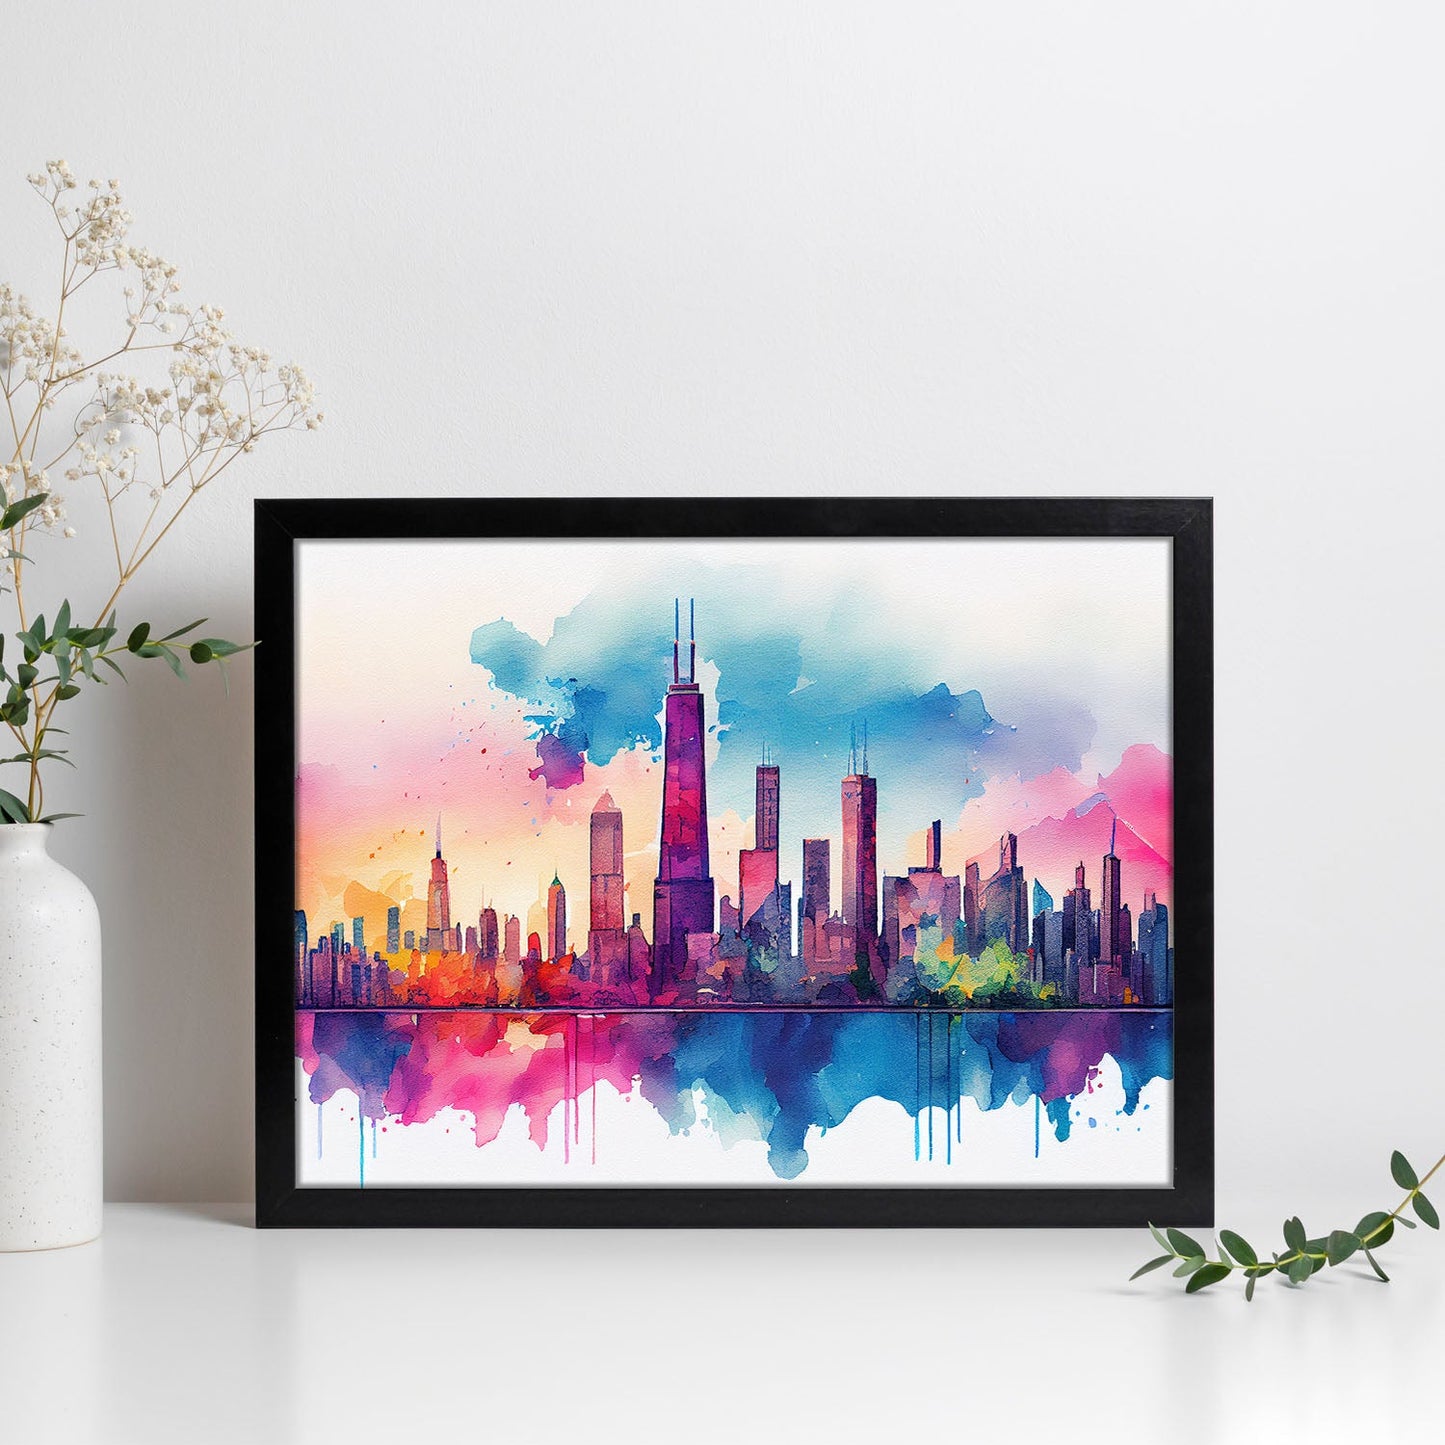 Nacnic watercolor of a skyline of the city of Chicago. Aesthetic Wall Art Prints for Bedroom or Living Room Design.-Artwork-Nacnic-A4-Sin Marco-Nacnic Estudio SL